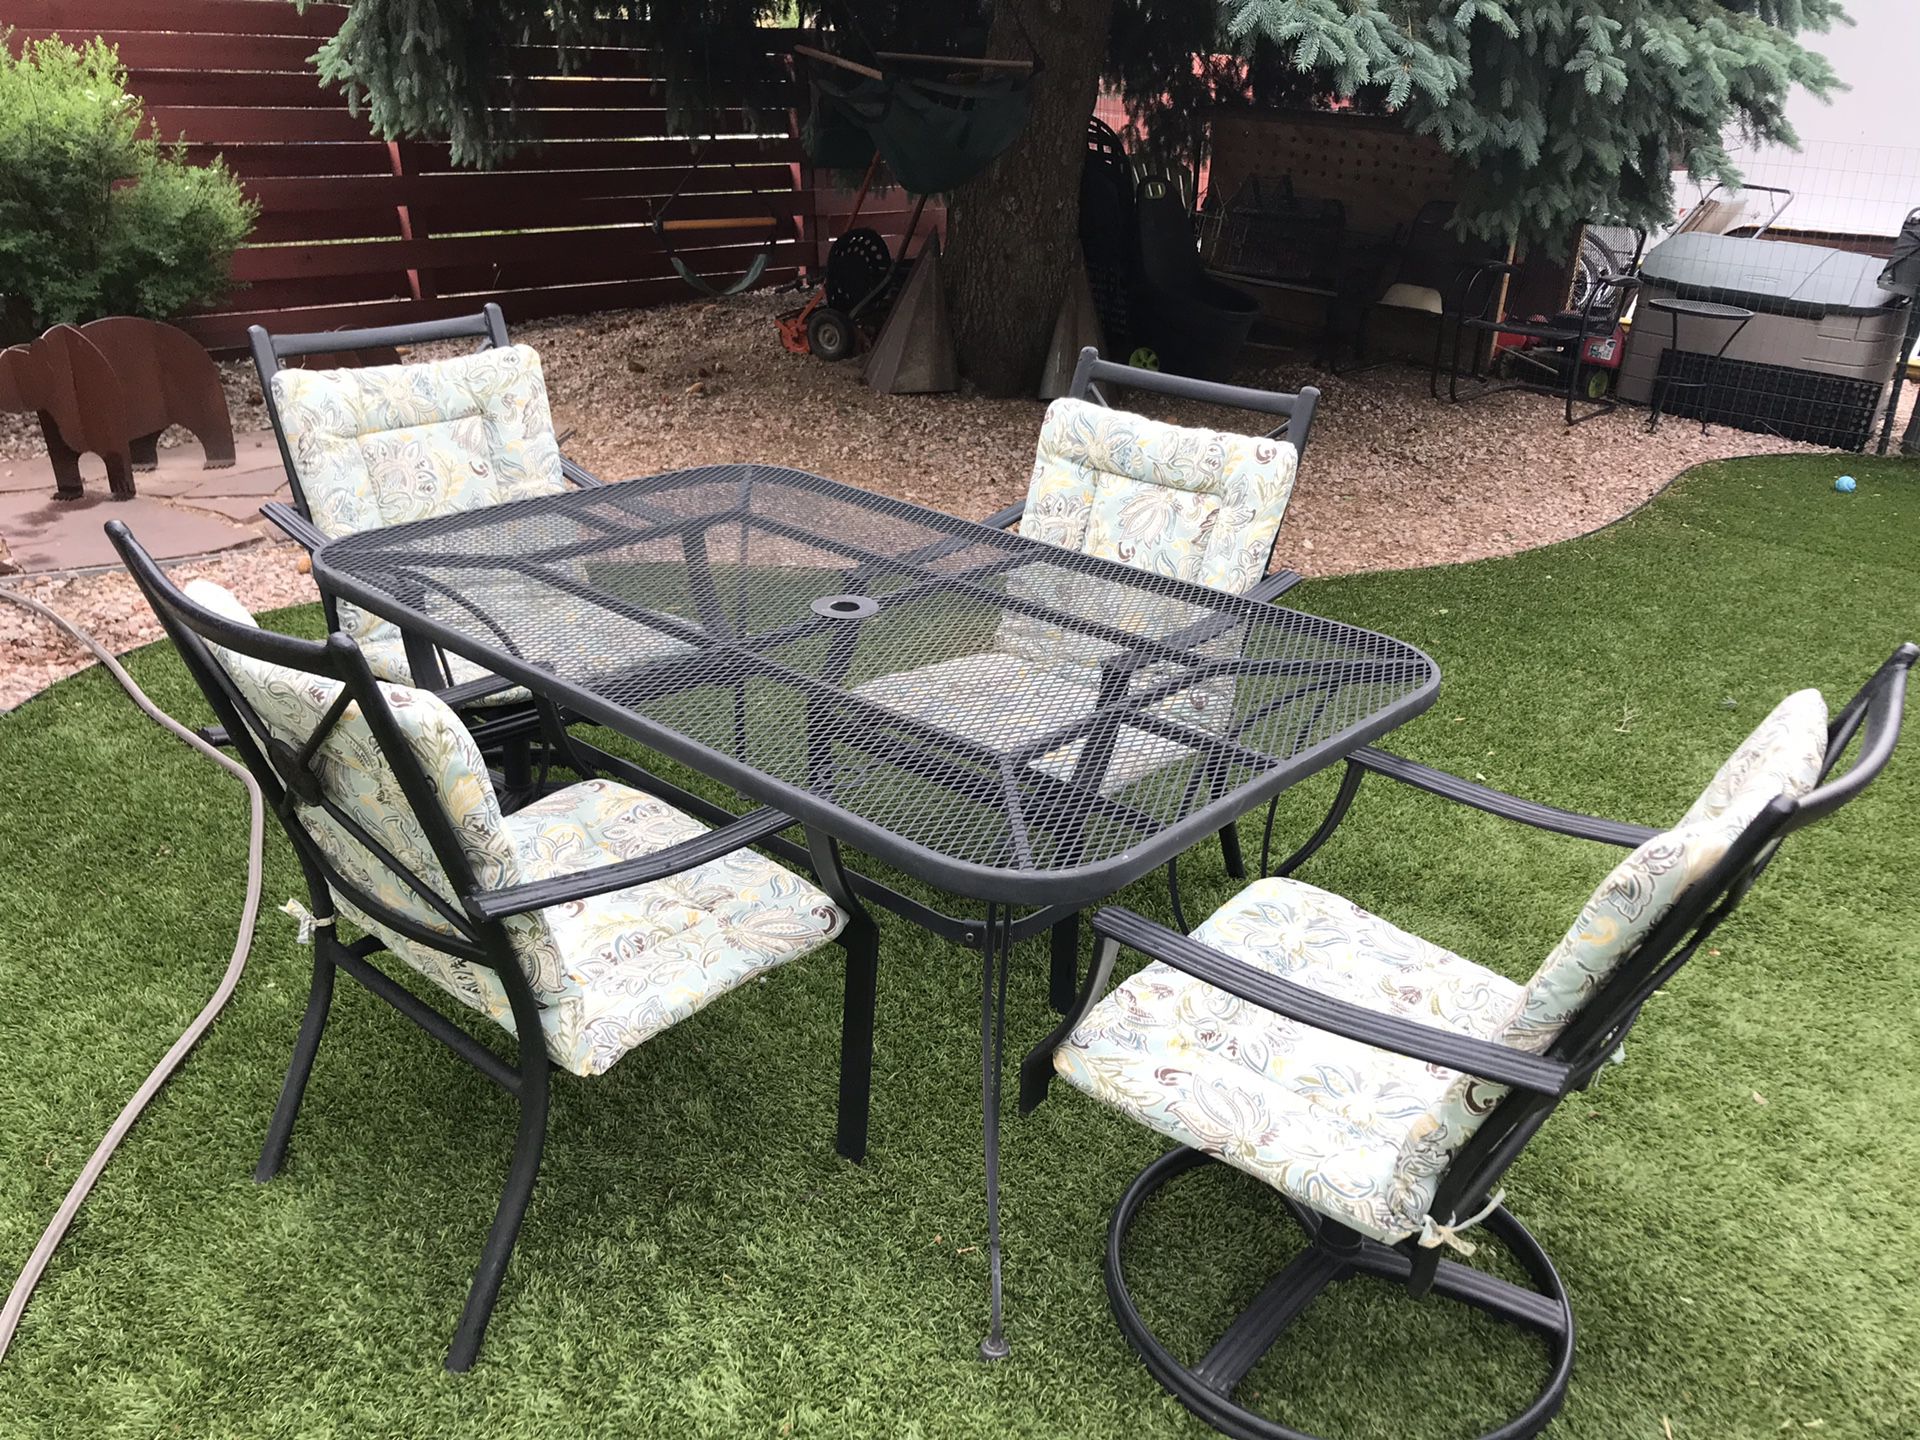 Wrought iron patio table with 4 chairs